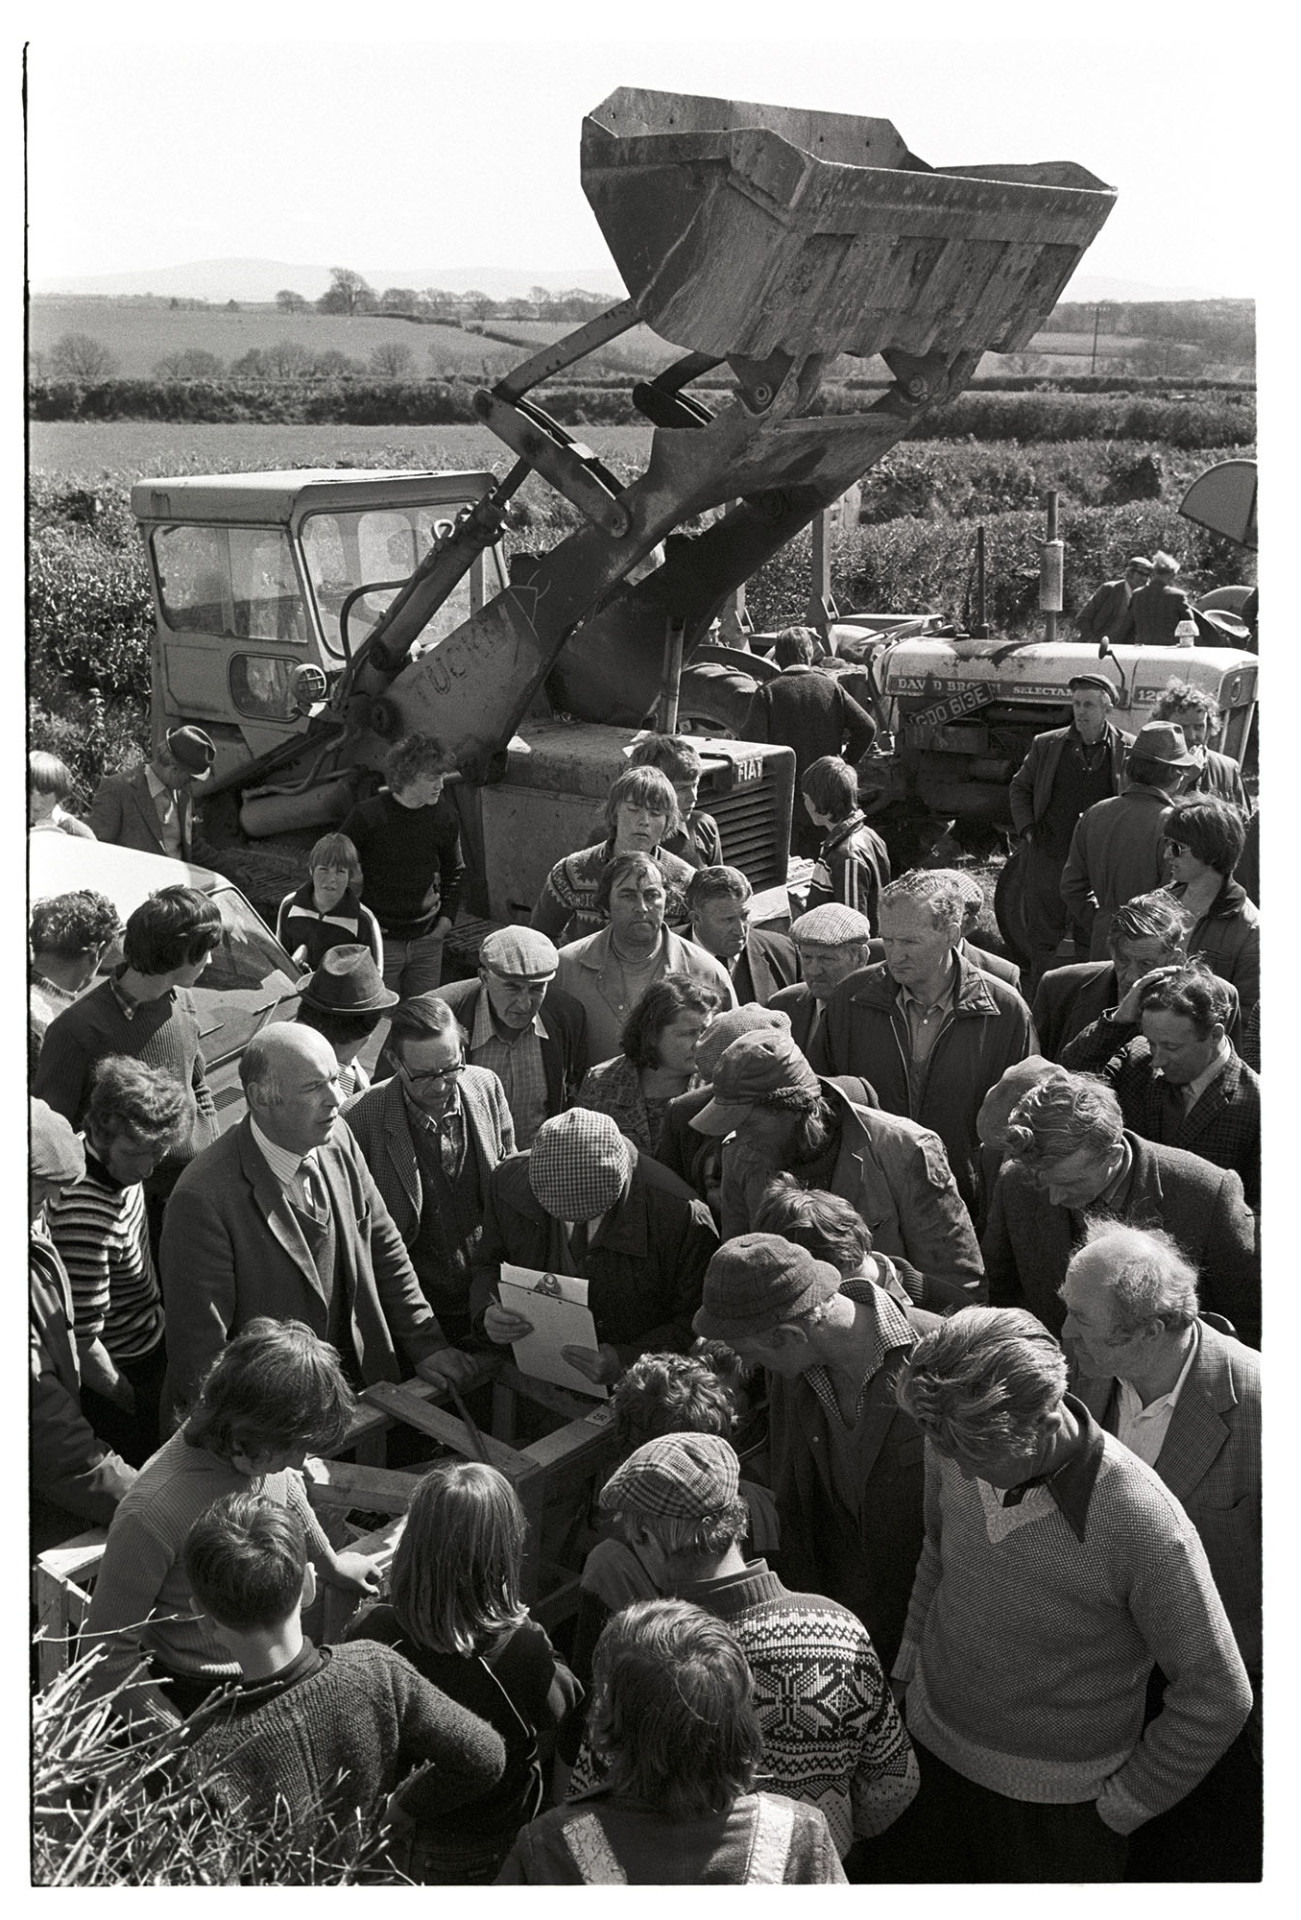 Crowd at farm sale, crowds with bulldozer and auctioneer. 
[A crowd and auctioneer at a farm sale at Venton, Winkleigh. They are stood by a car, bulldozer and tractor, which are being sold.]